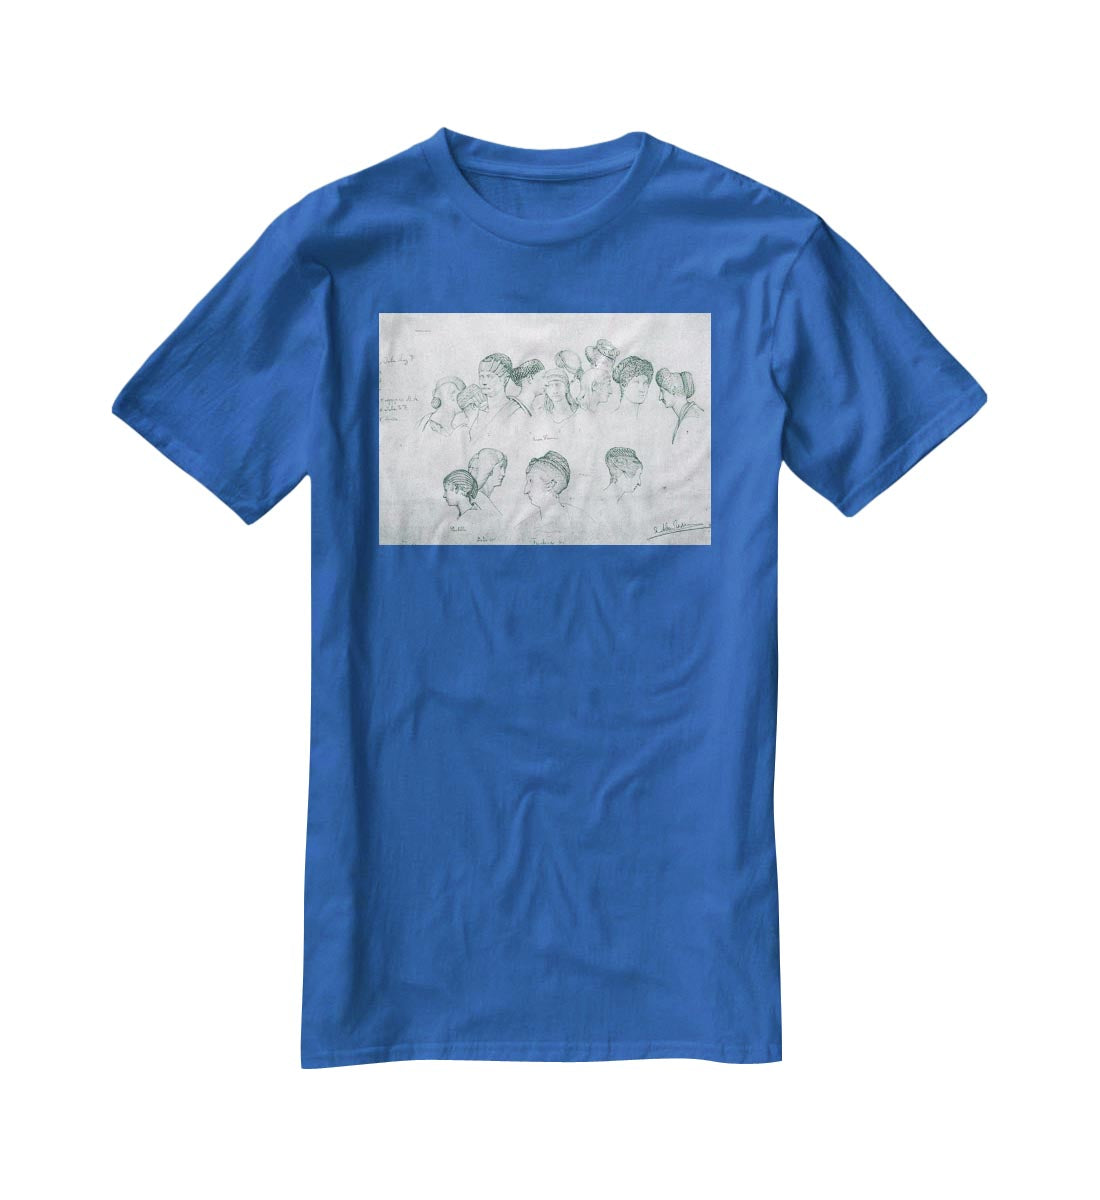 Sketch of hairstyles from ancient sculptures by Alma Tadema T-Shirt - Canvas Art Rocks - 2